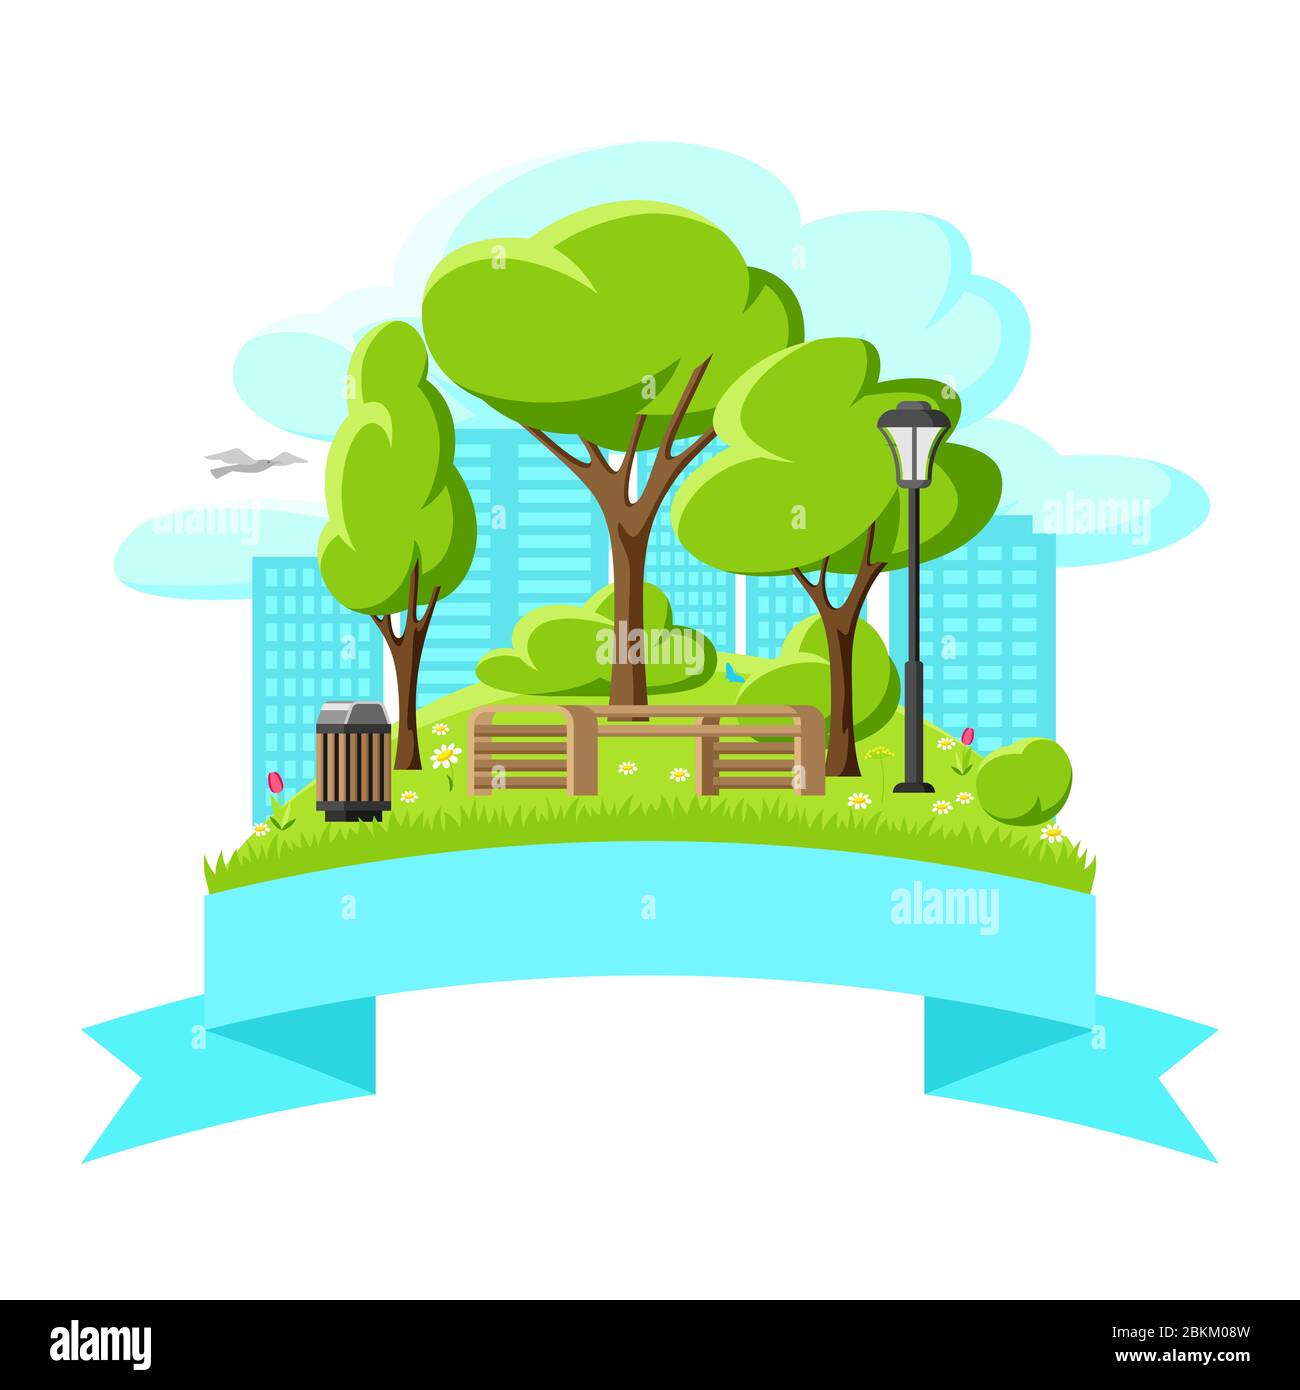 Illustration of beautiful summer or spring city park. Stock Vector